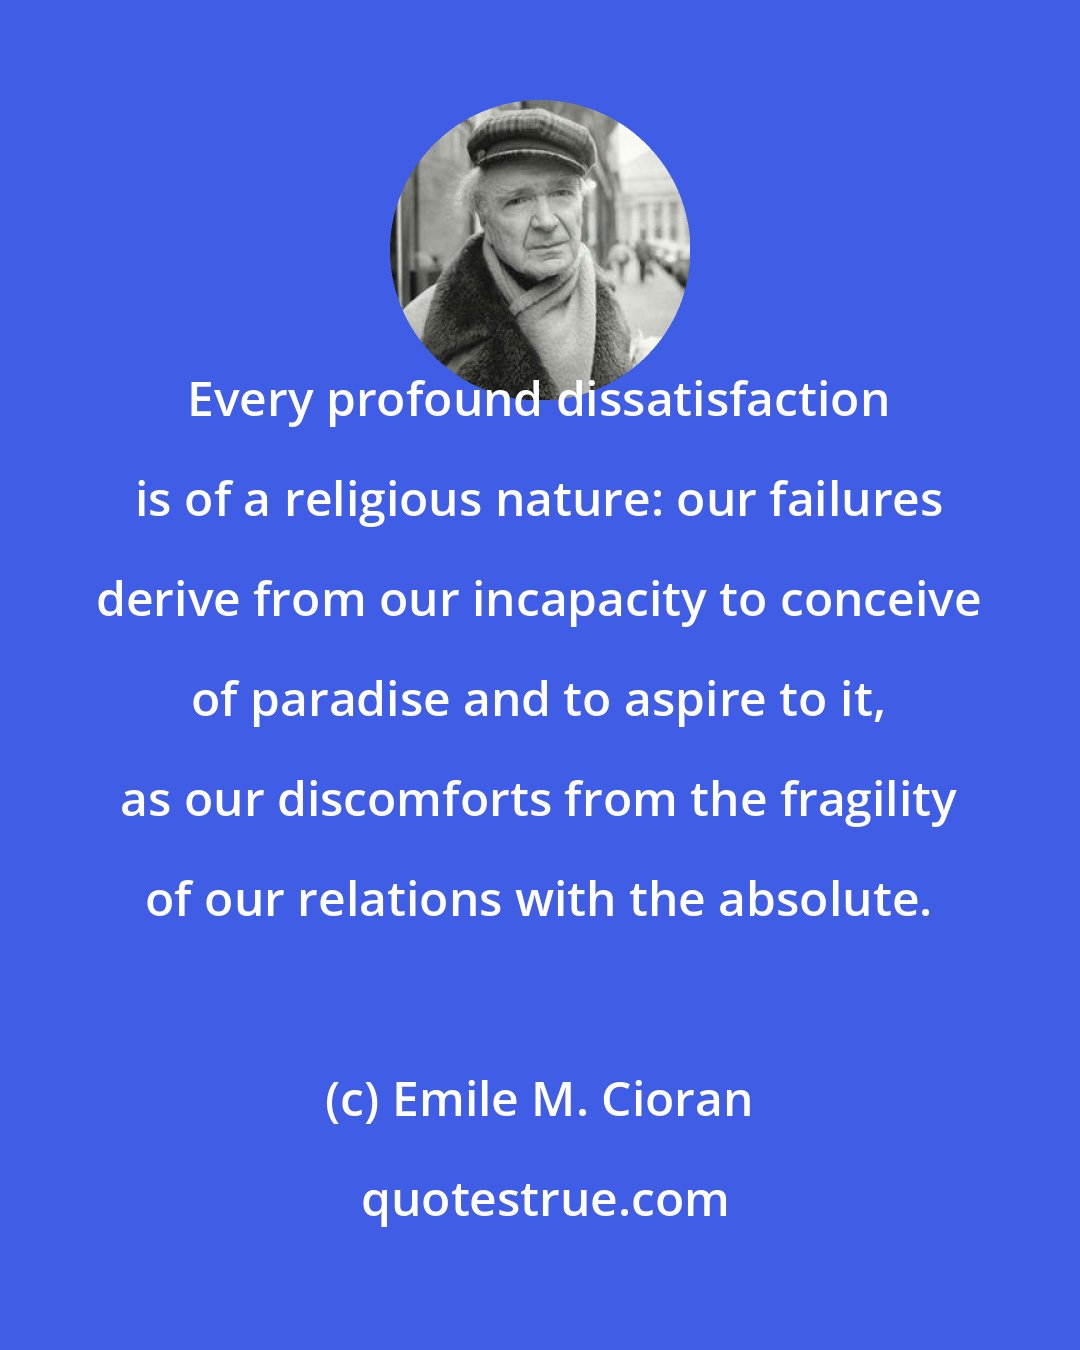 Emile M. Cioran: Every profound dissatisfaction is of a religious nature: our failures derive from our incapacity to conceive of paradise and to aspire to it, as our discomforts from the fragility of our relations with the absolute.